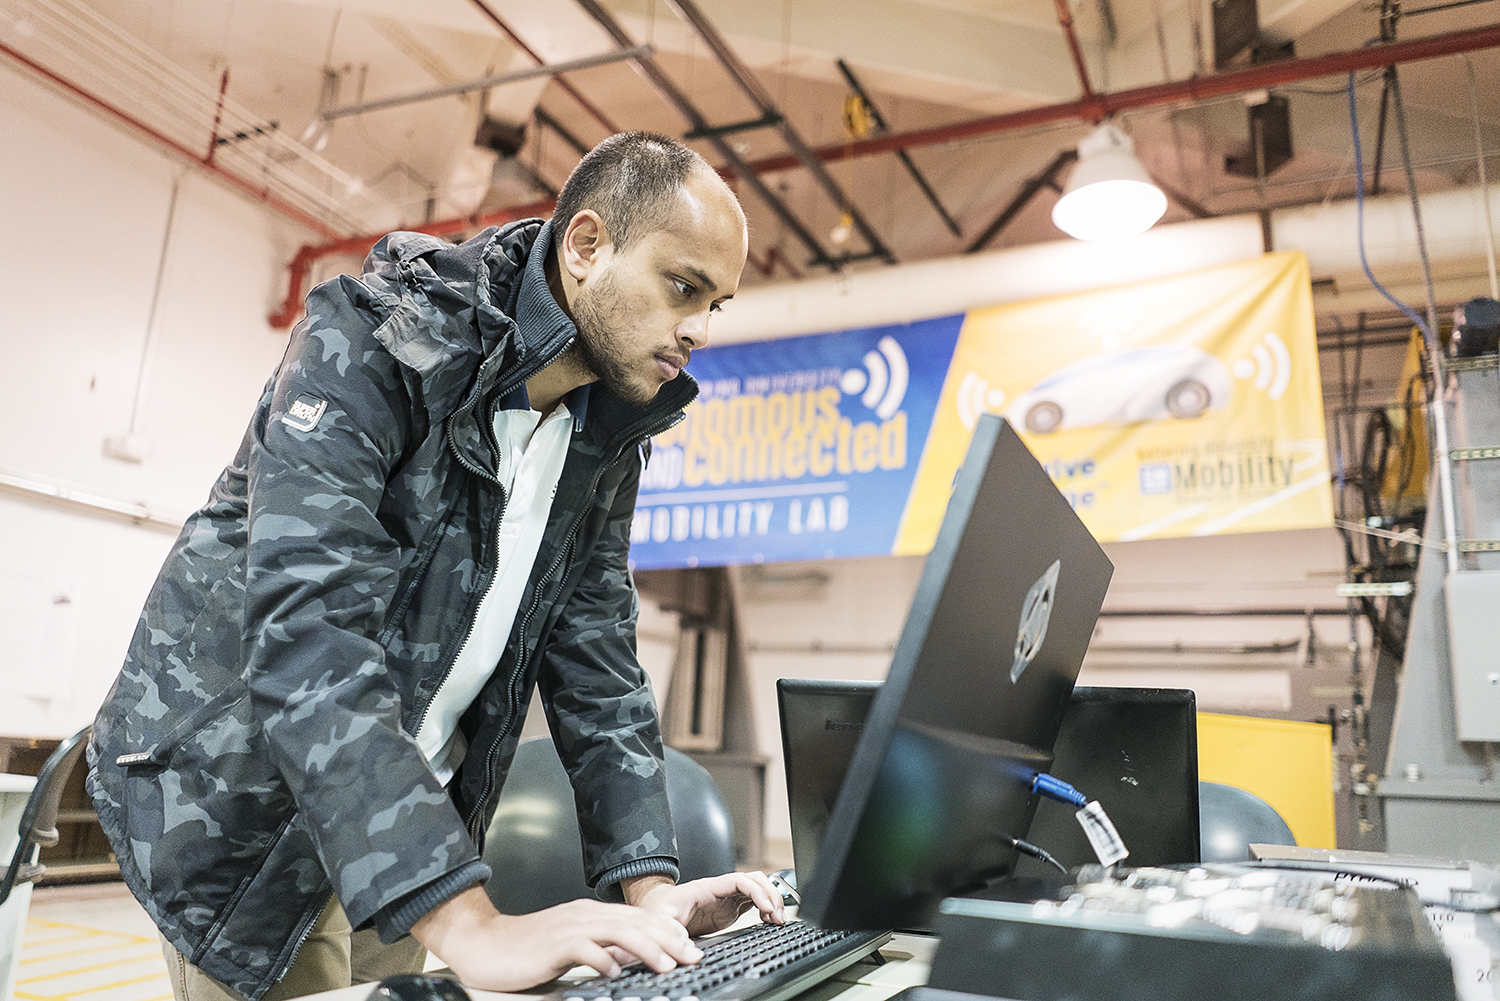 Flint, MI - Friday, November 10, 2017: Shobit Sharma, 26, one of two student coordinators for the SAE/GM AutoDrive Competition checks a connection between the server and Chevrolet Bolt electronic car in the garage at Kettering University.